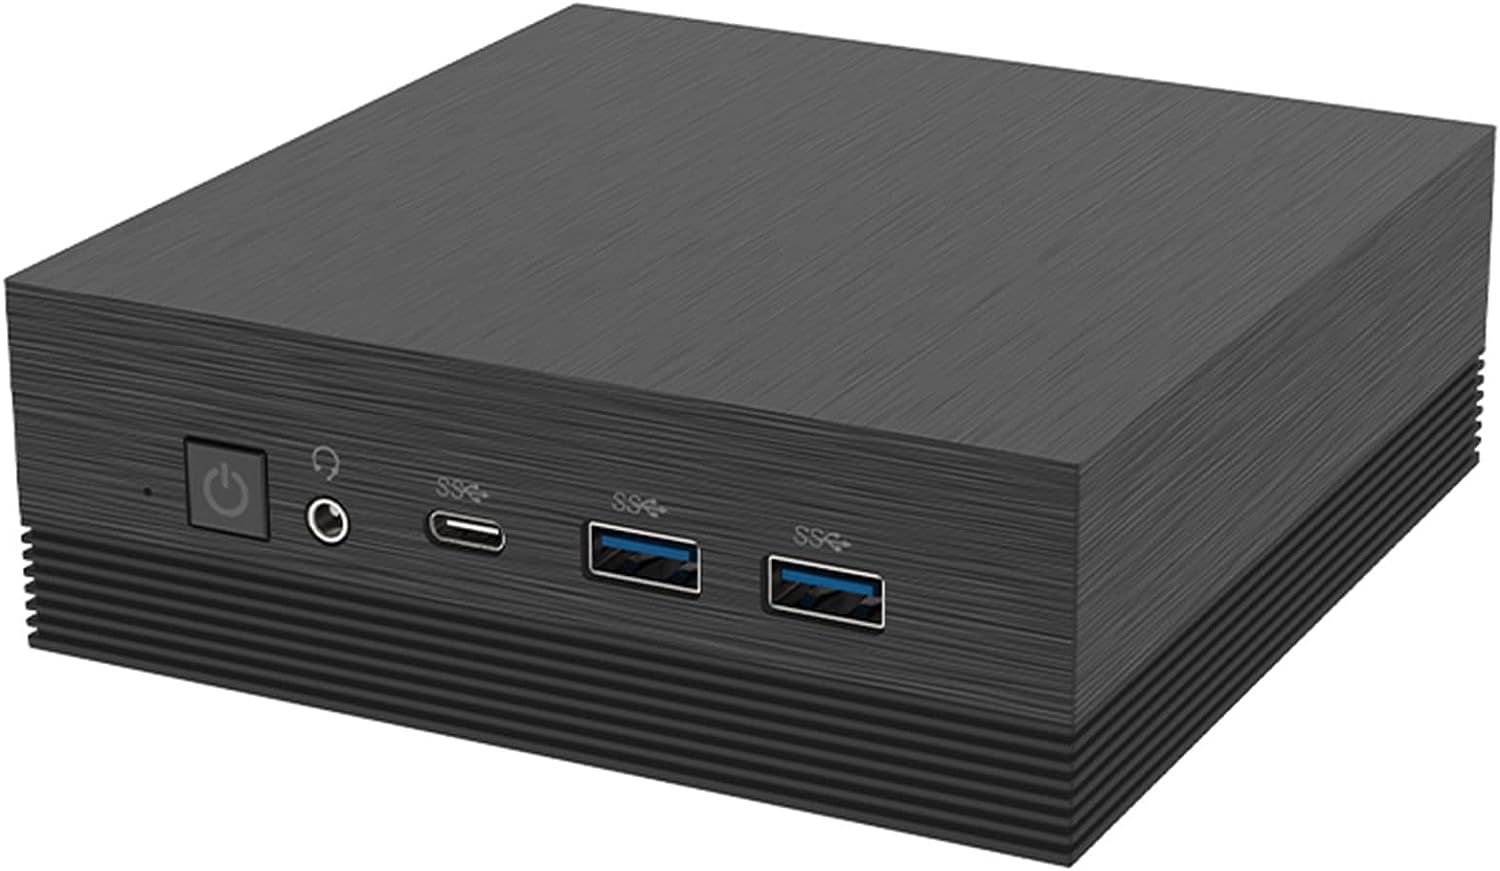 Mini PC Windows 10 Pro, AMD A9 9400(up to 3.2Ghz) 8GB DDR4 128GB SSD Mini Computers HDMI DP 2.4G/5G Dual Band WiFi BT4.0 Dual Gigabit Ethernet Auto Power On for Business Office Home Use : Electronics